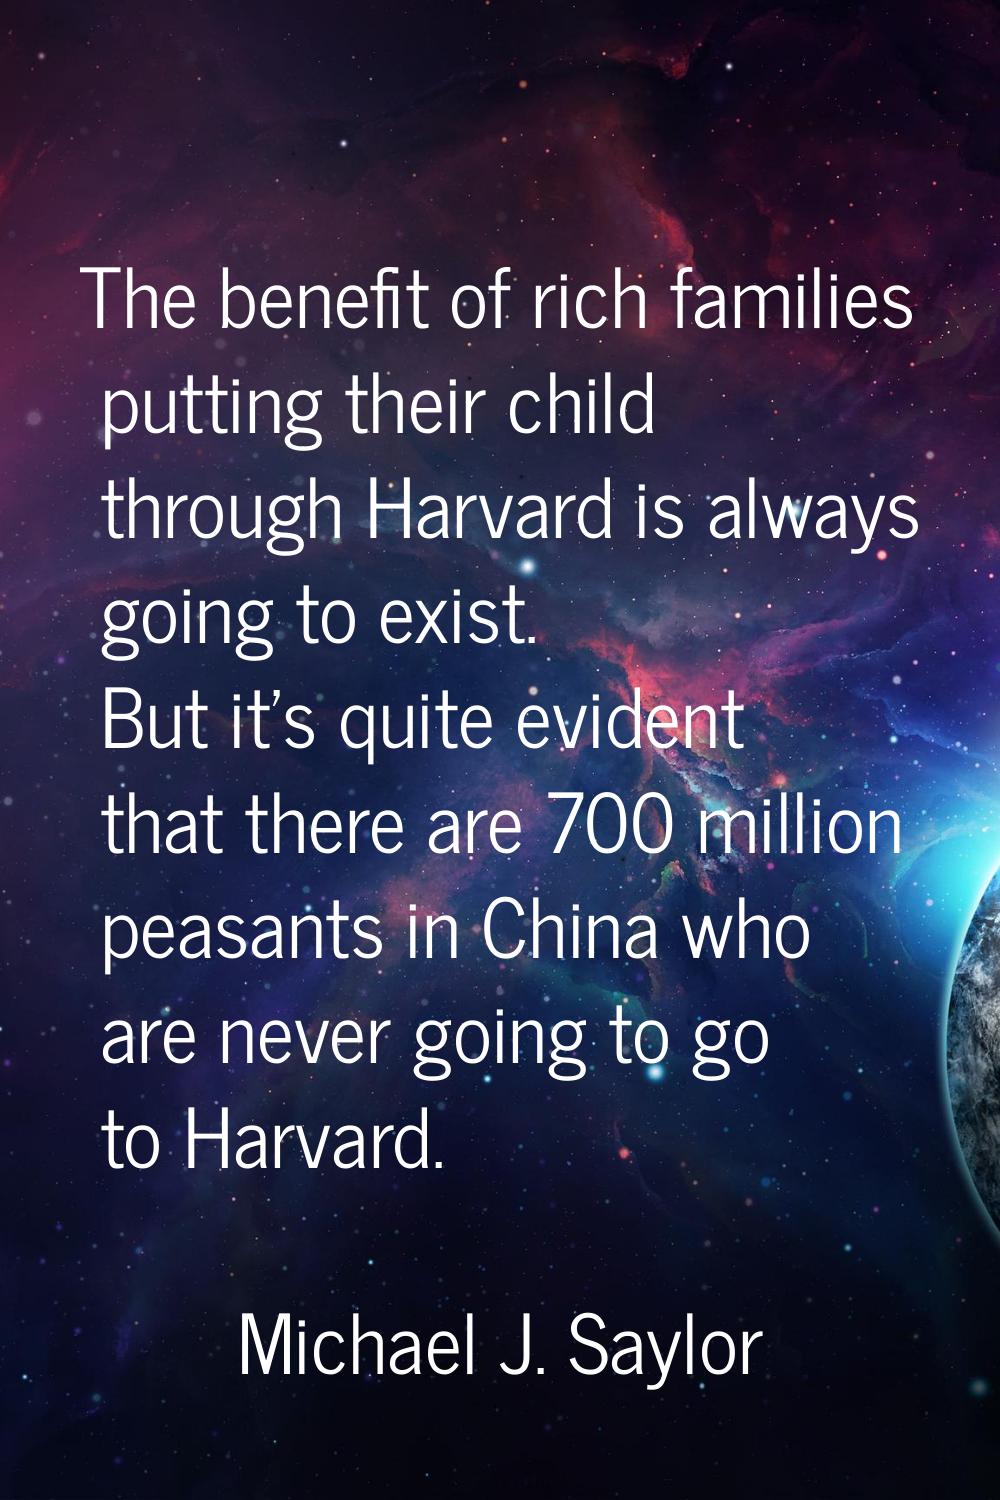 The benefit of rich families putting their child through Harvard is always going to exist. But it's